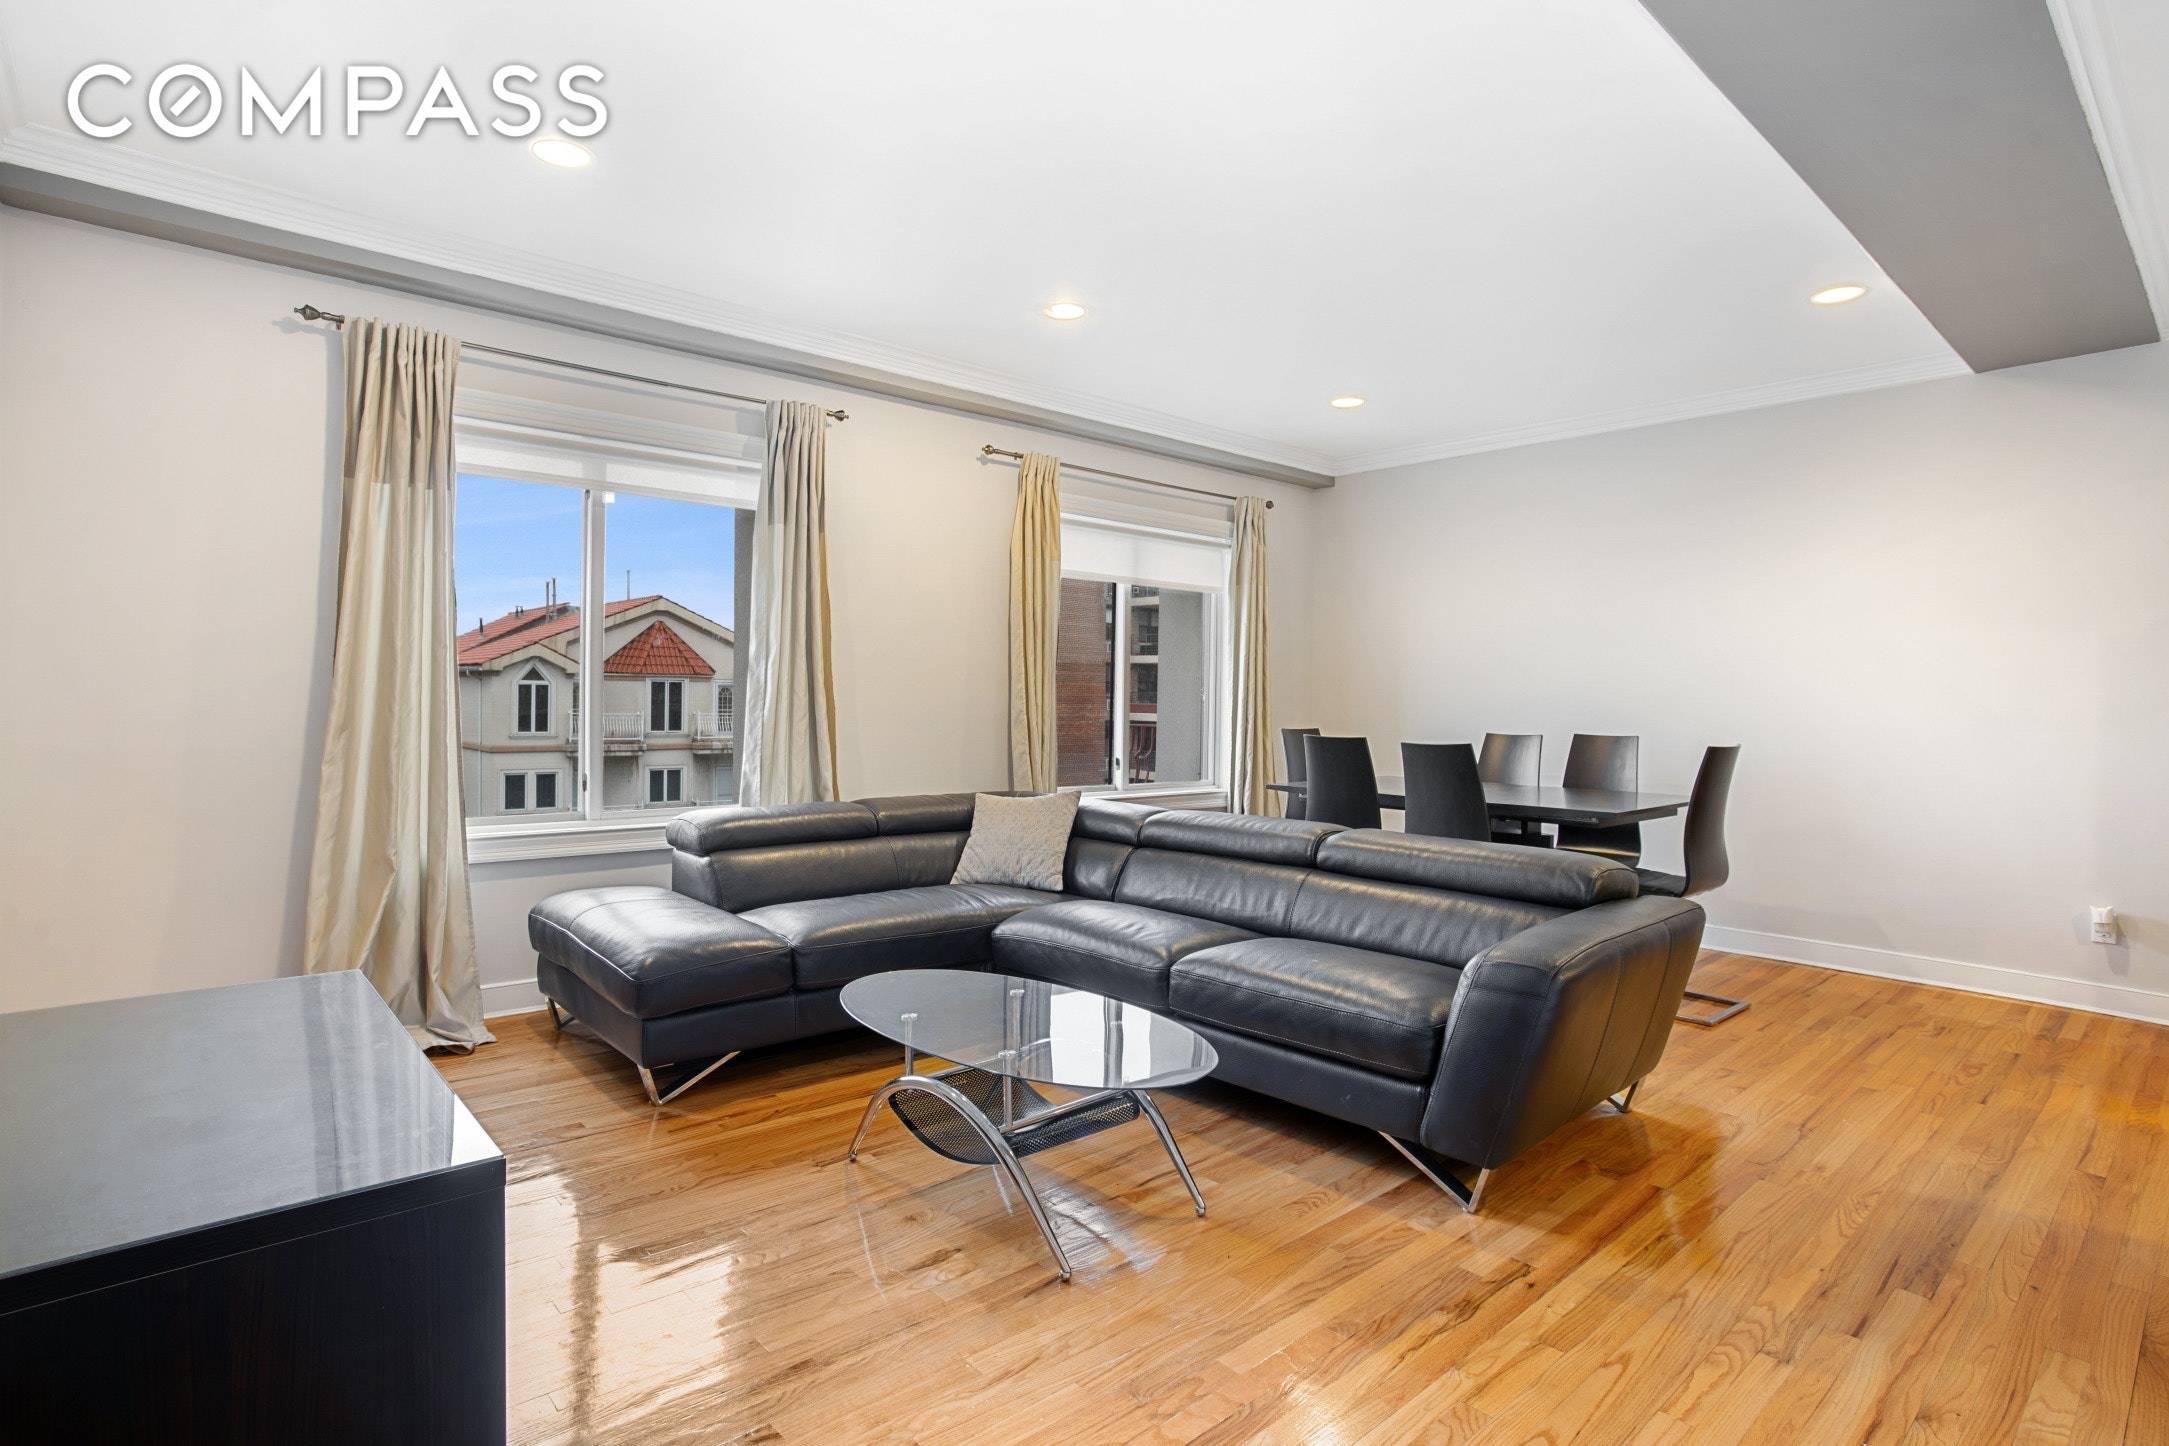 Residence 3F is a large one bedroom, one bath condominium apartment in prime Sheepshead Bay.